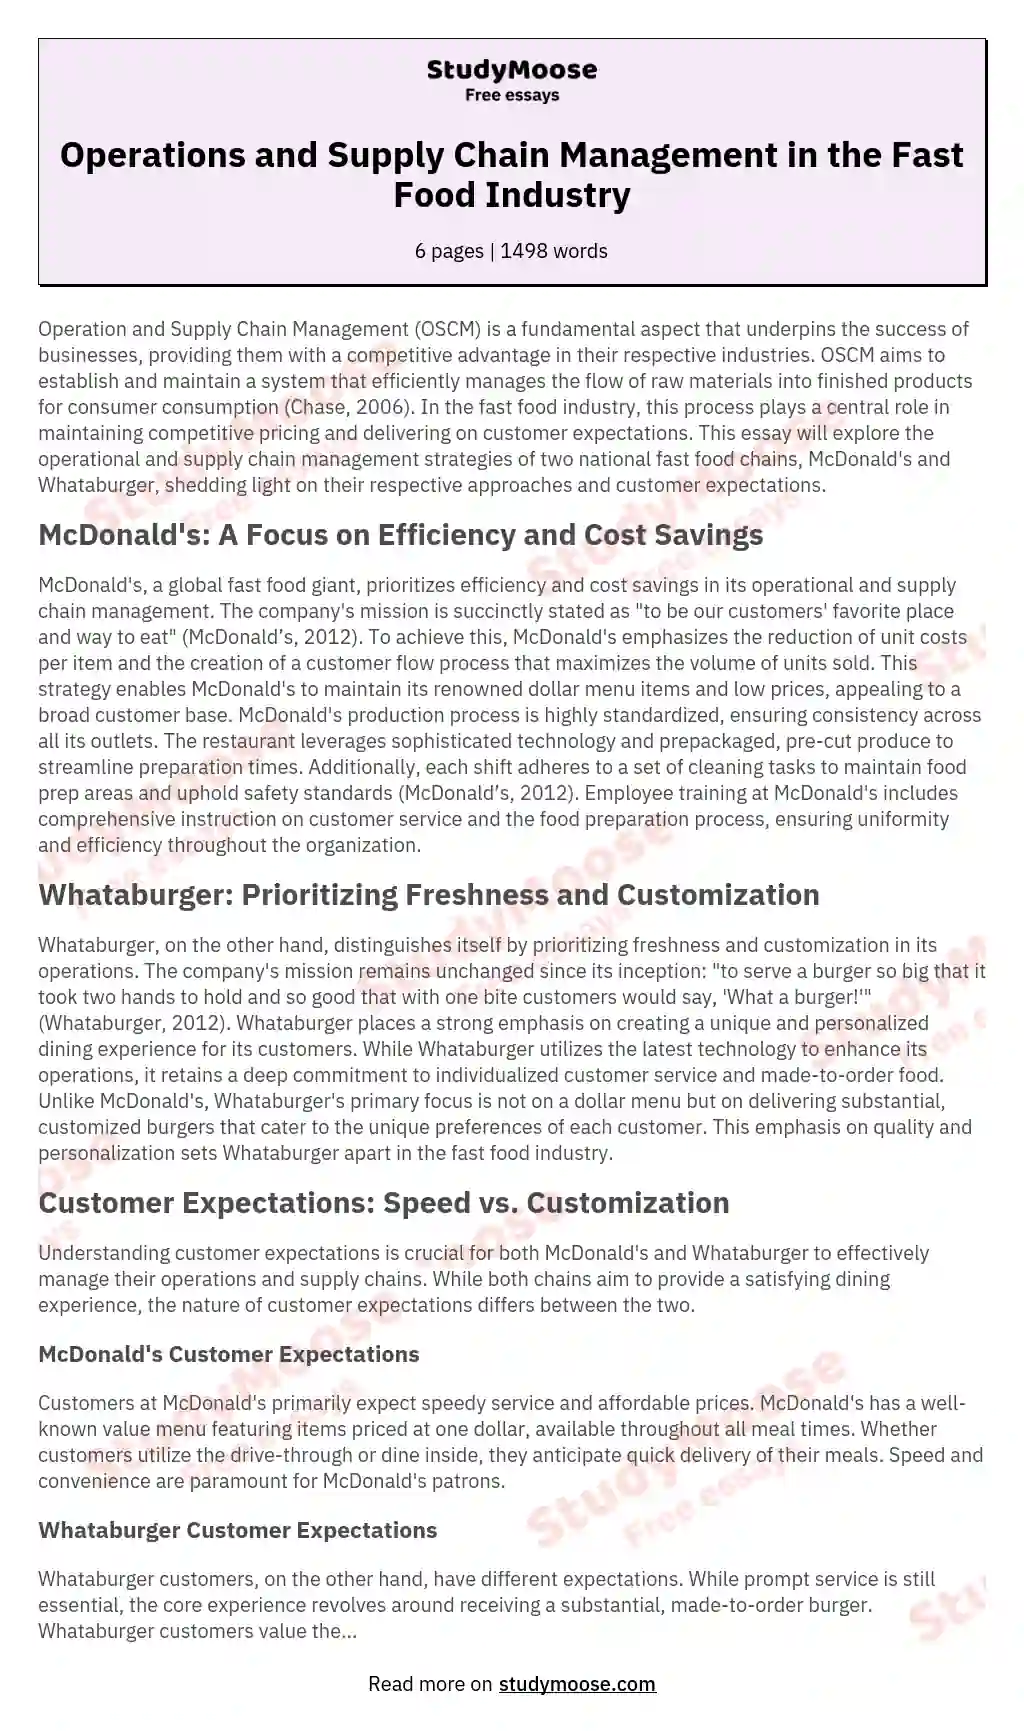 Operations and Supply Chain Management in the Fast Food Industry essay